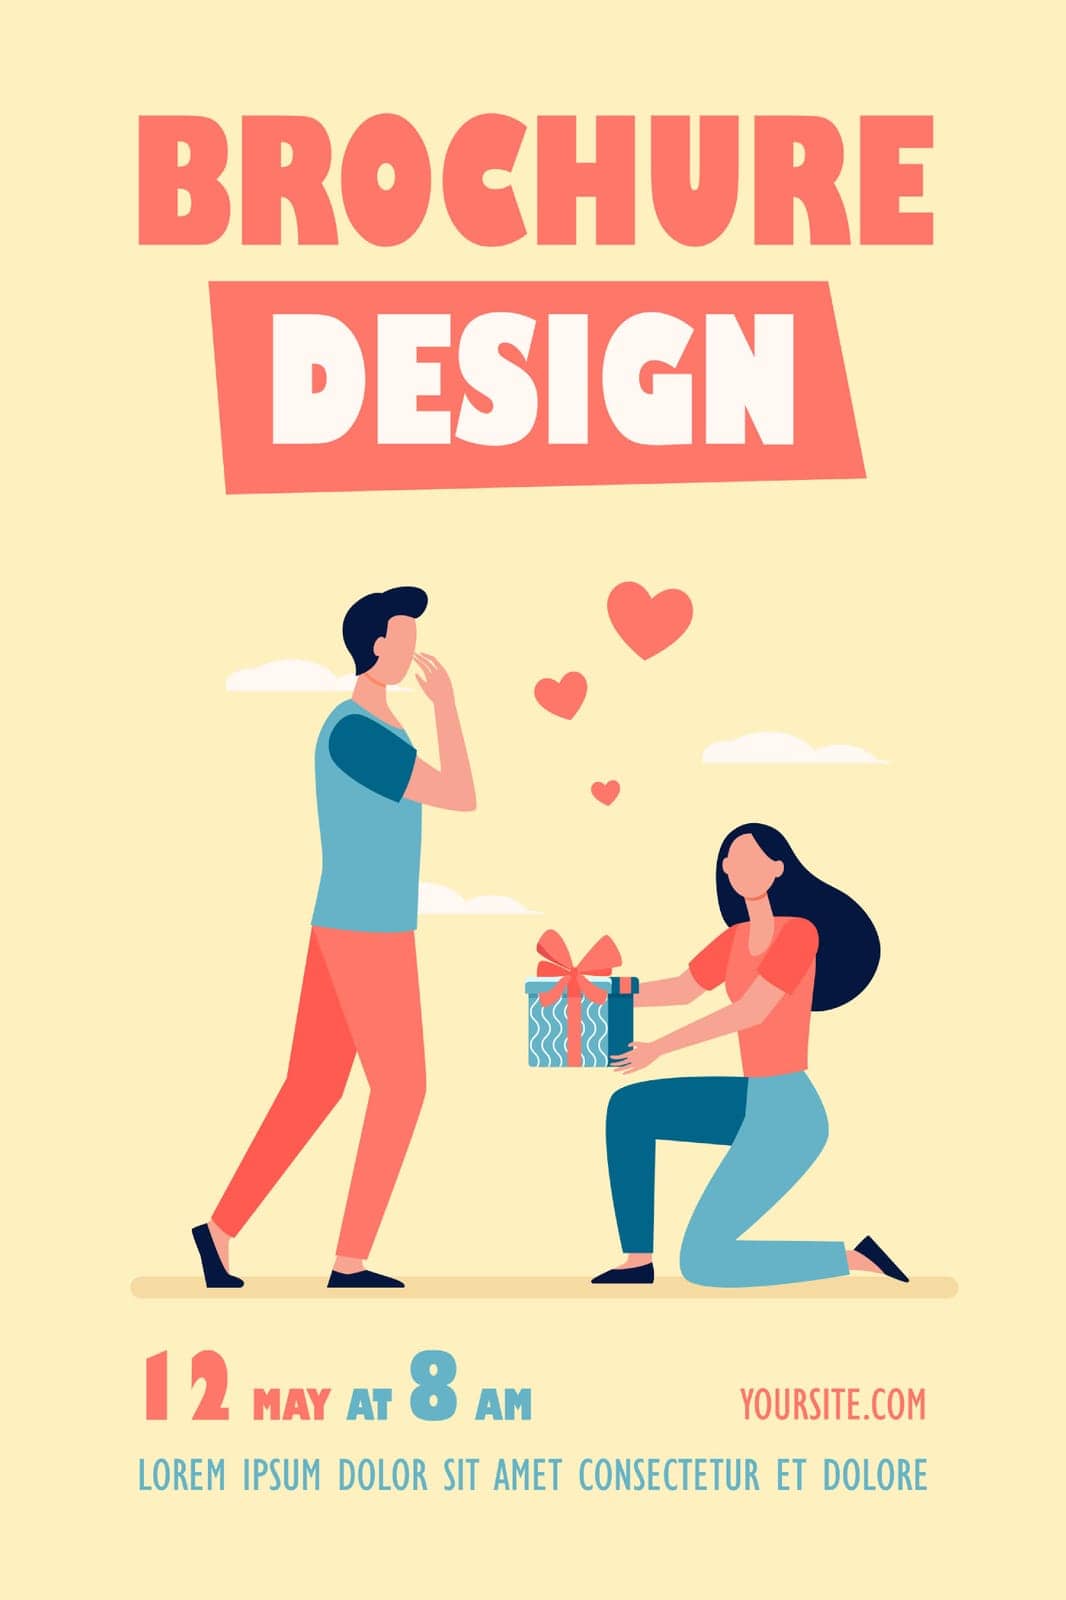 Woman giving gift to her boyfriend. Girl with present box getting down on one knee flat vector illustration. Love, special date concept for banner, website design or landing web page